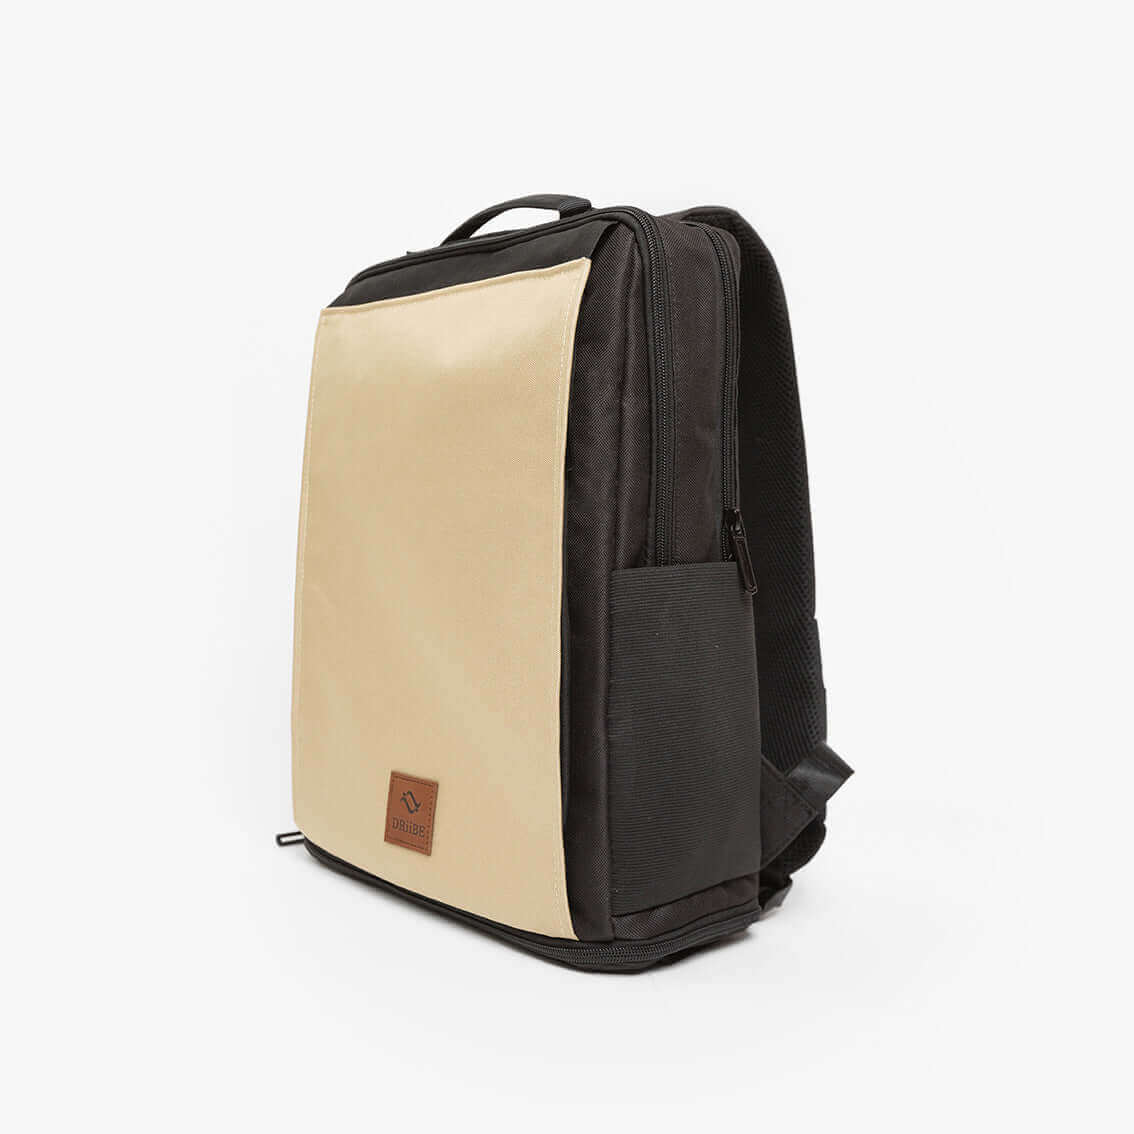 CITYC 2 in 1 Travel Backpack-0